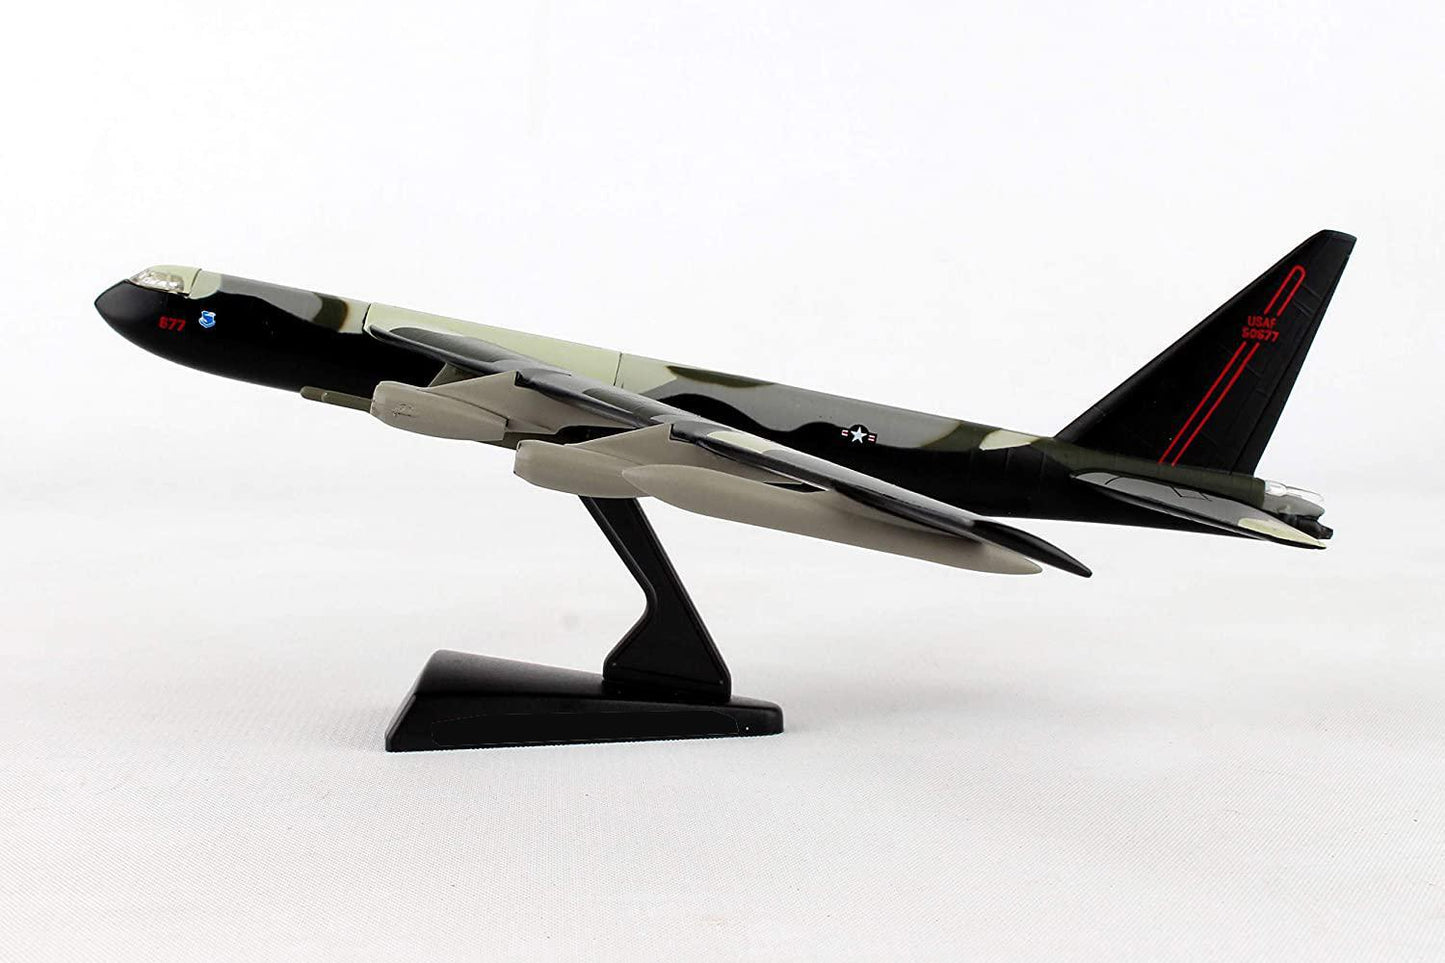 Daron B-52 Stratofortress long range jet bomber Airplane Collector Vehicle (1:300 Scale)